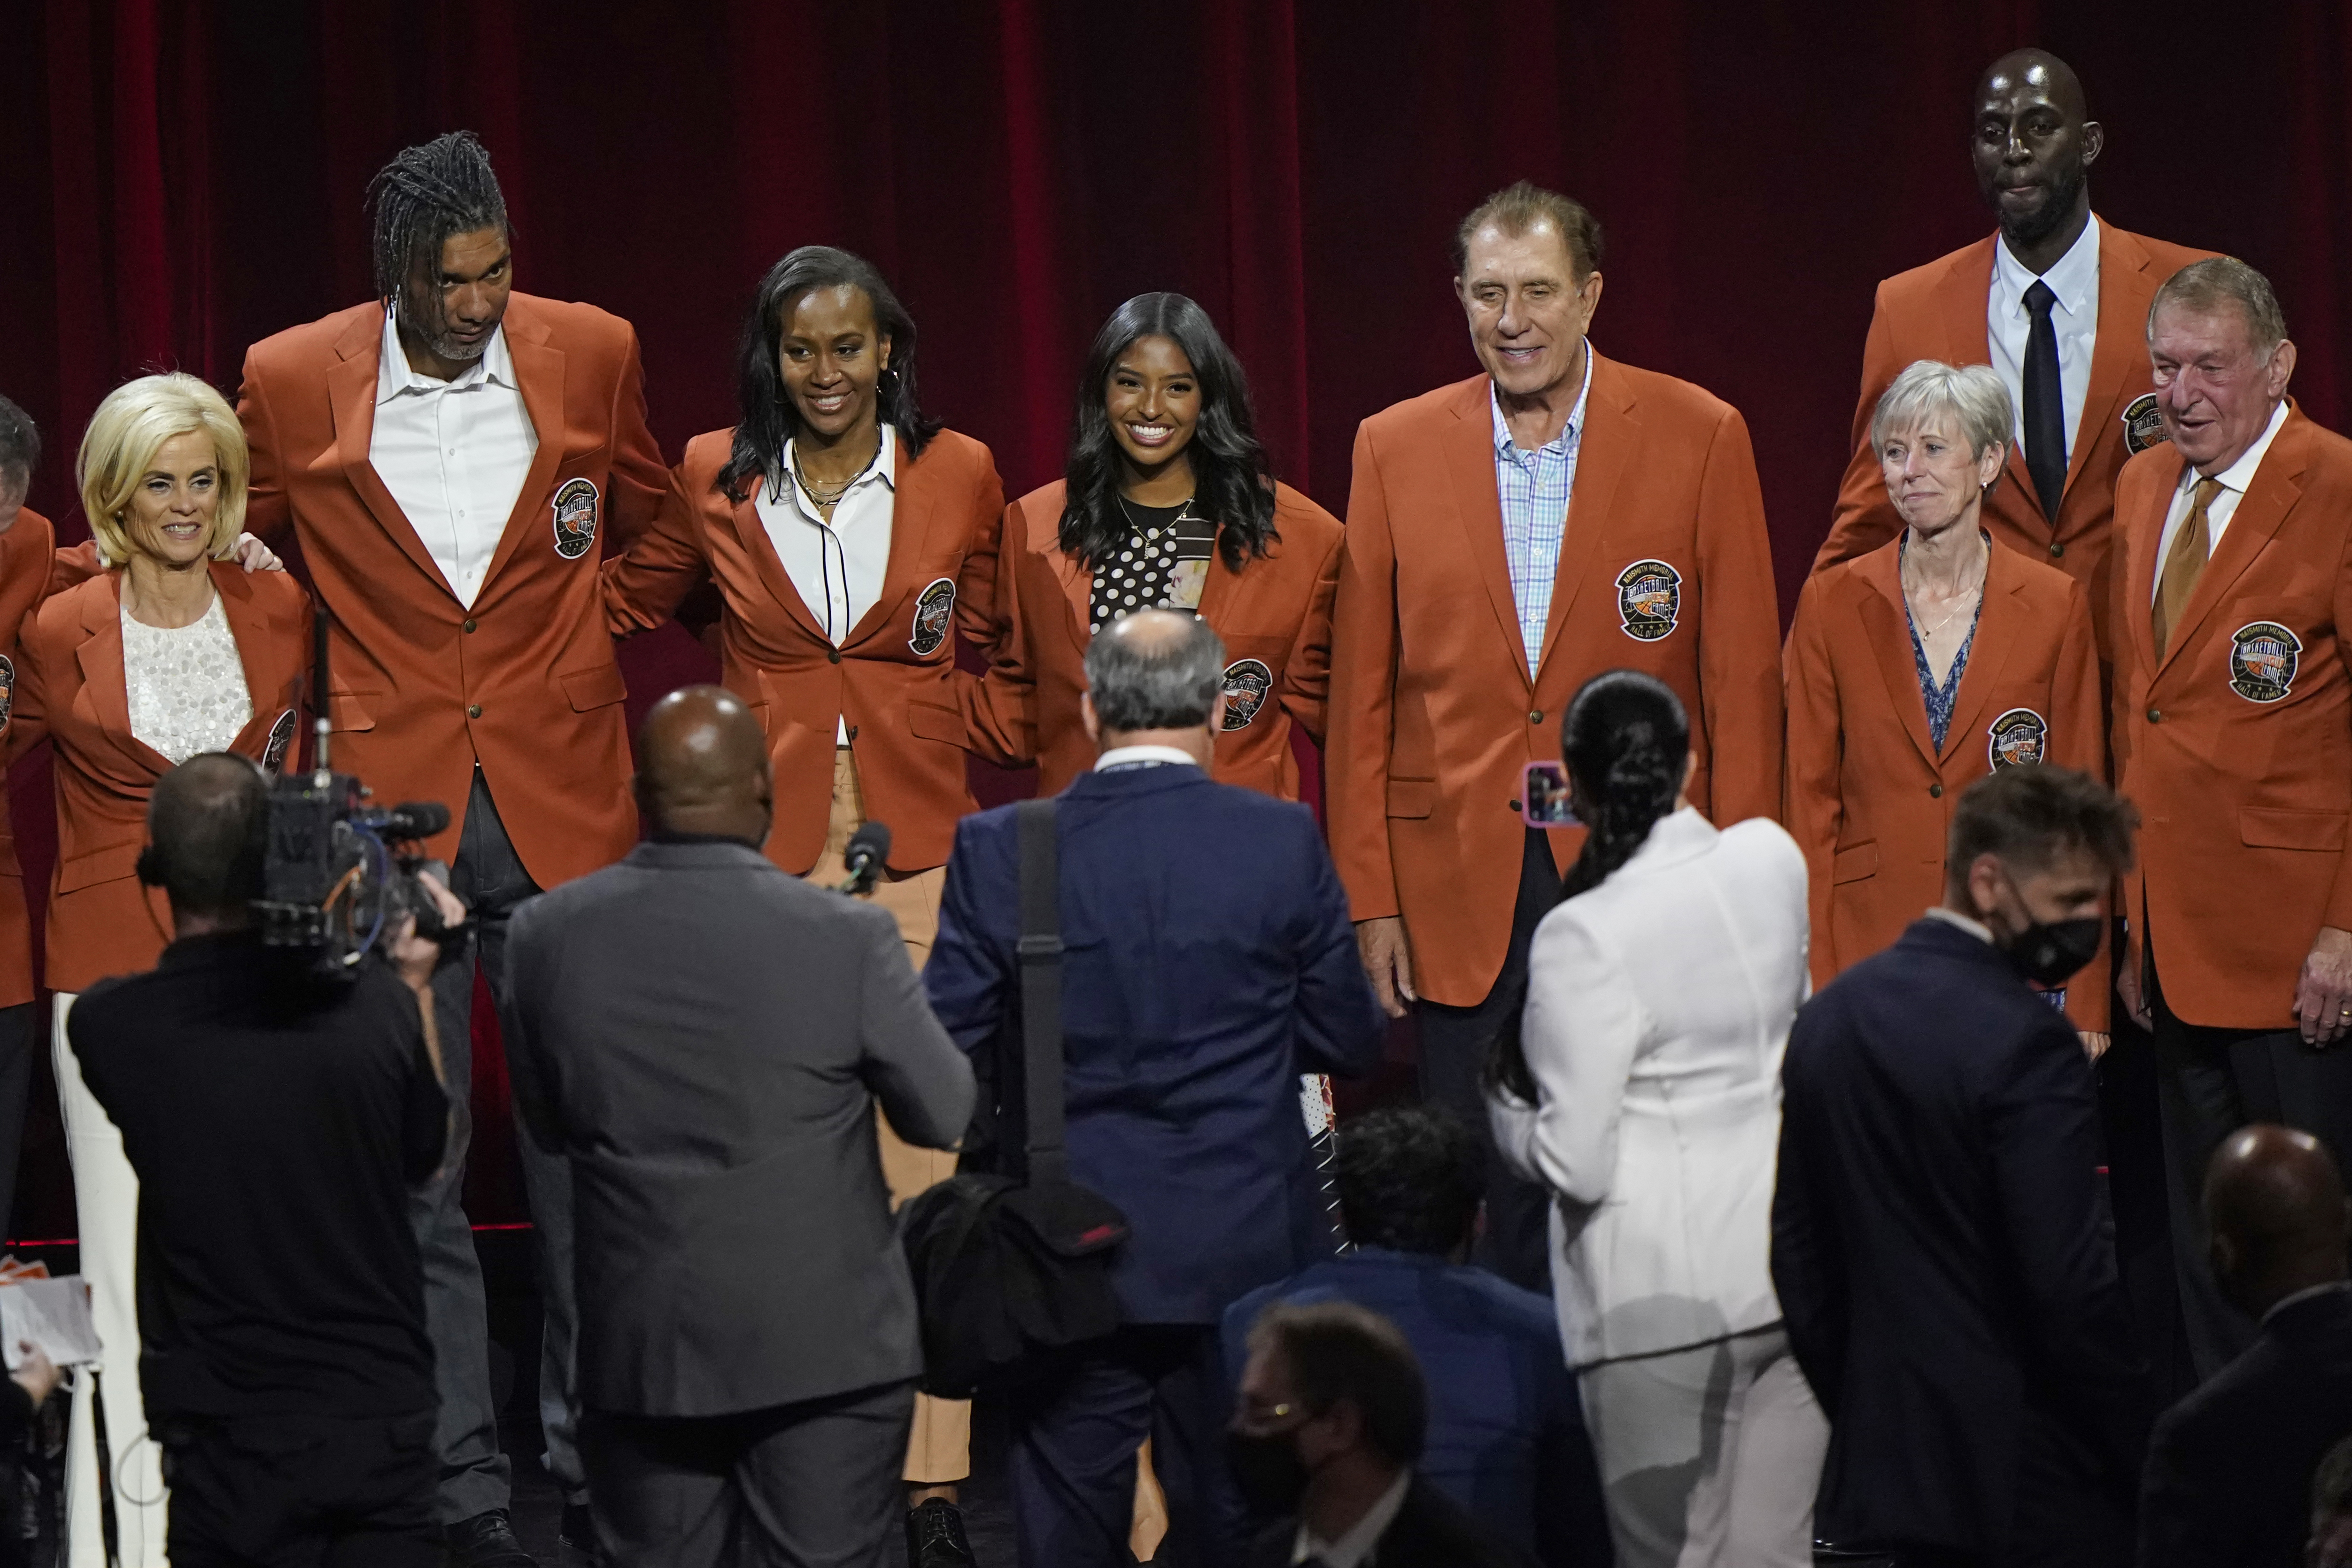 Kobe Bryant Hall of Fame Induction: Vanessa Bryant delivers